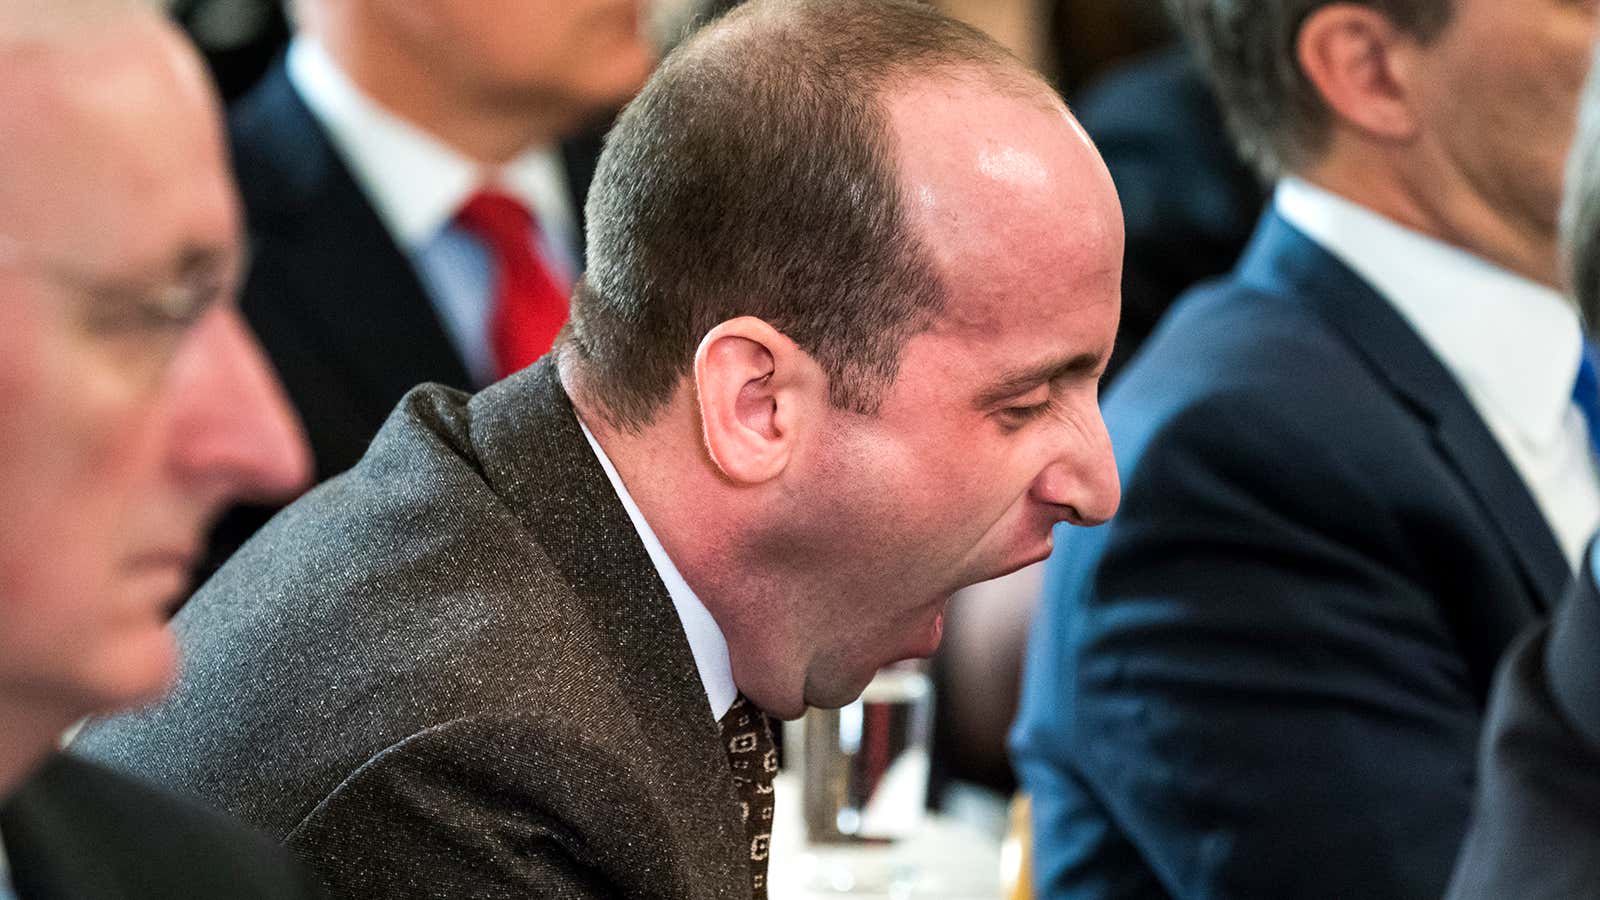 Stephen Miller, senior advisor for president Donald J. Trump, yawns as the president speaks about ways to combat mass shootings at high schools during a meeting with the nation’s governors in the State Dining Room of the White House.